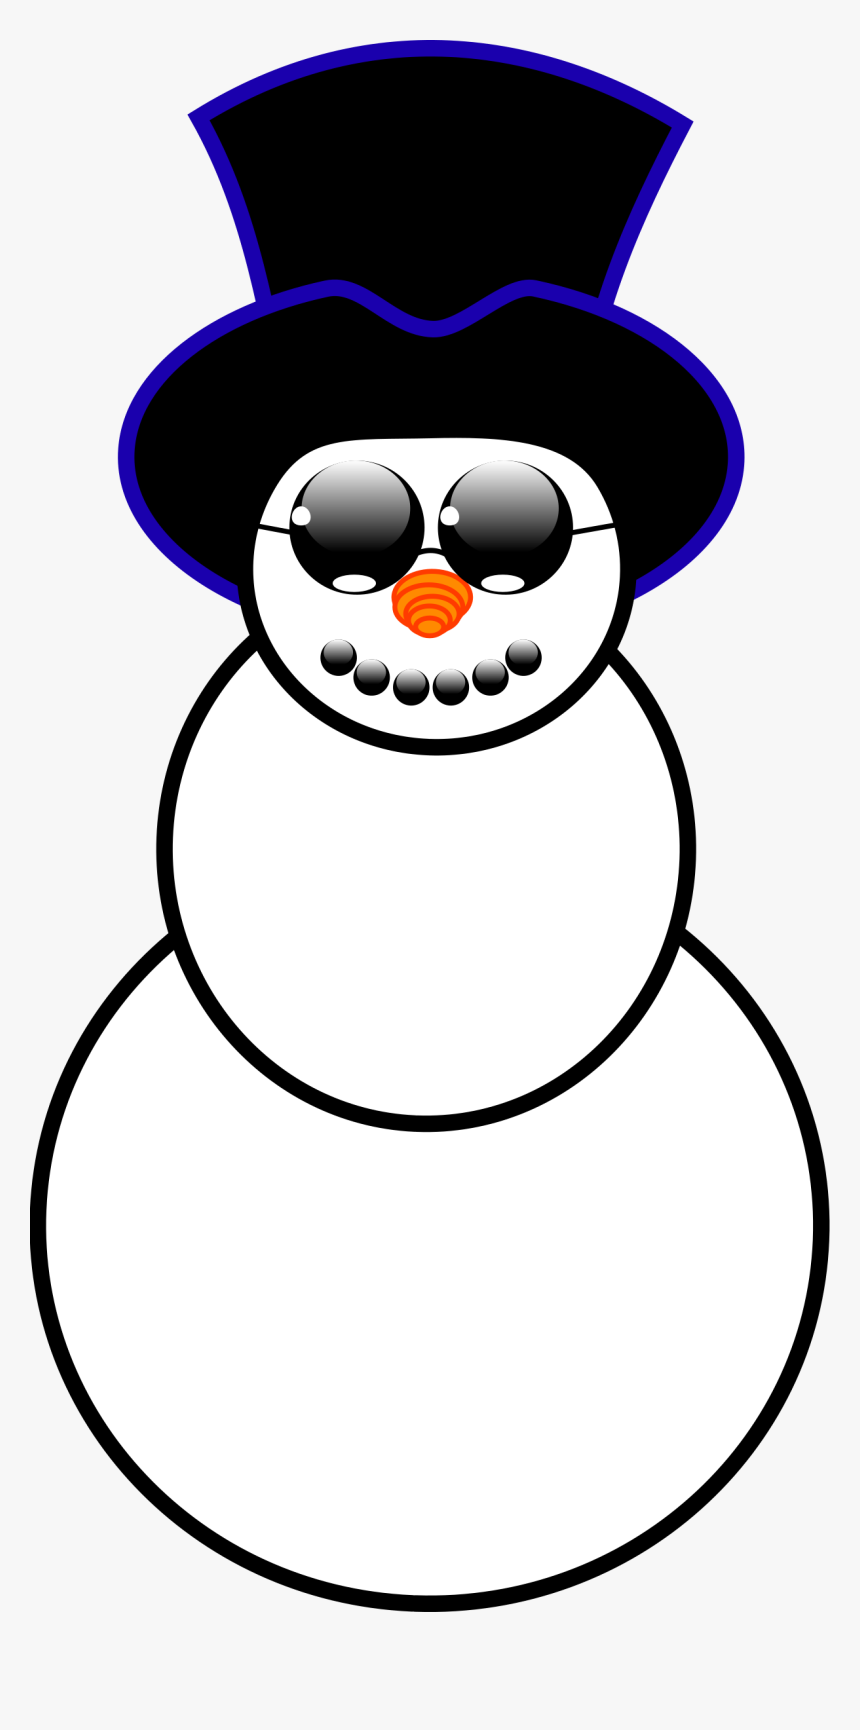 Snowman Clipart By Hextrust - Snowman With Sunglasses Clipart, HD Png Download, Free Download